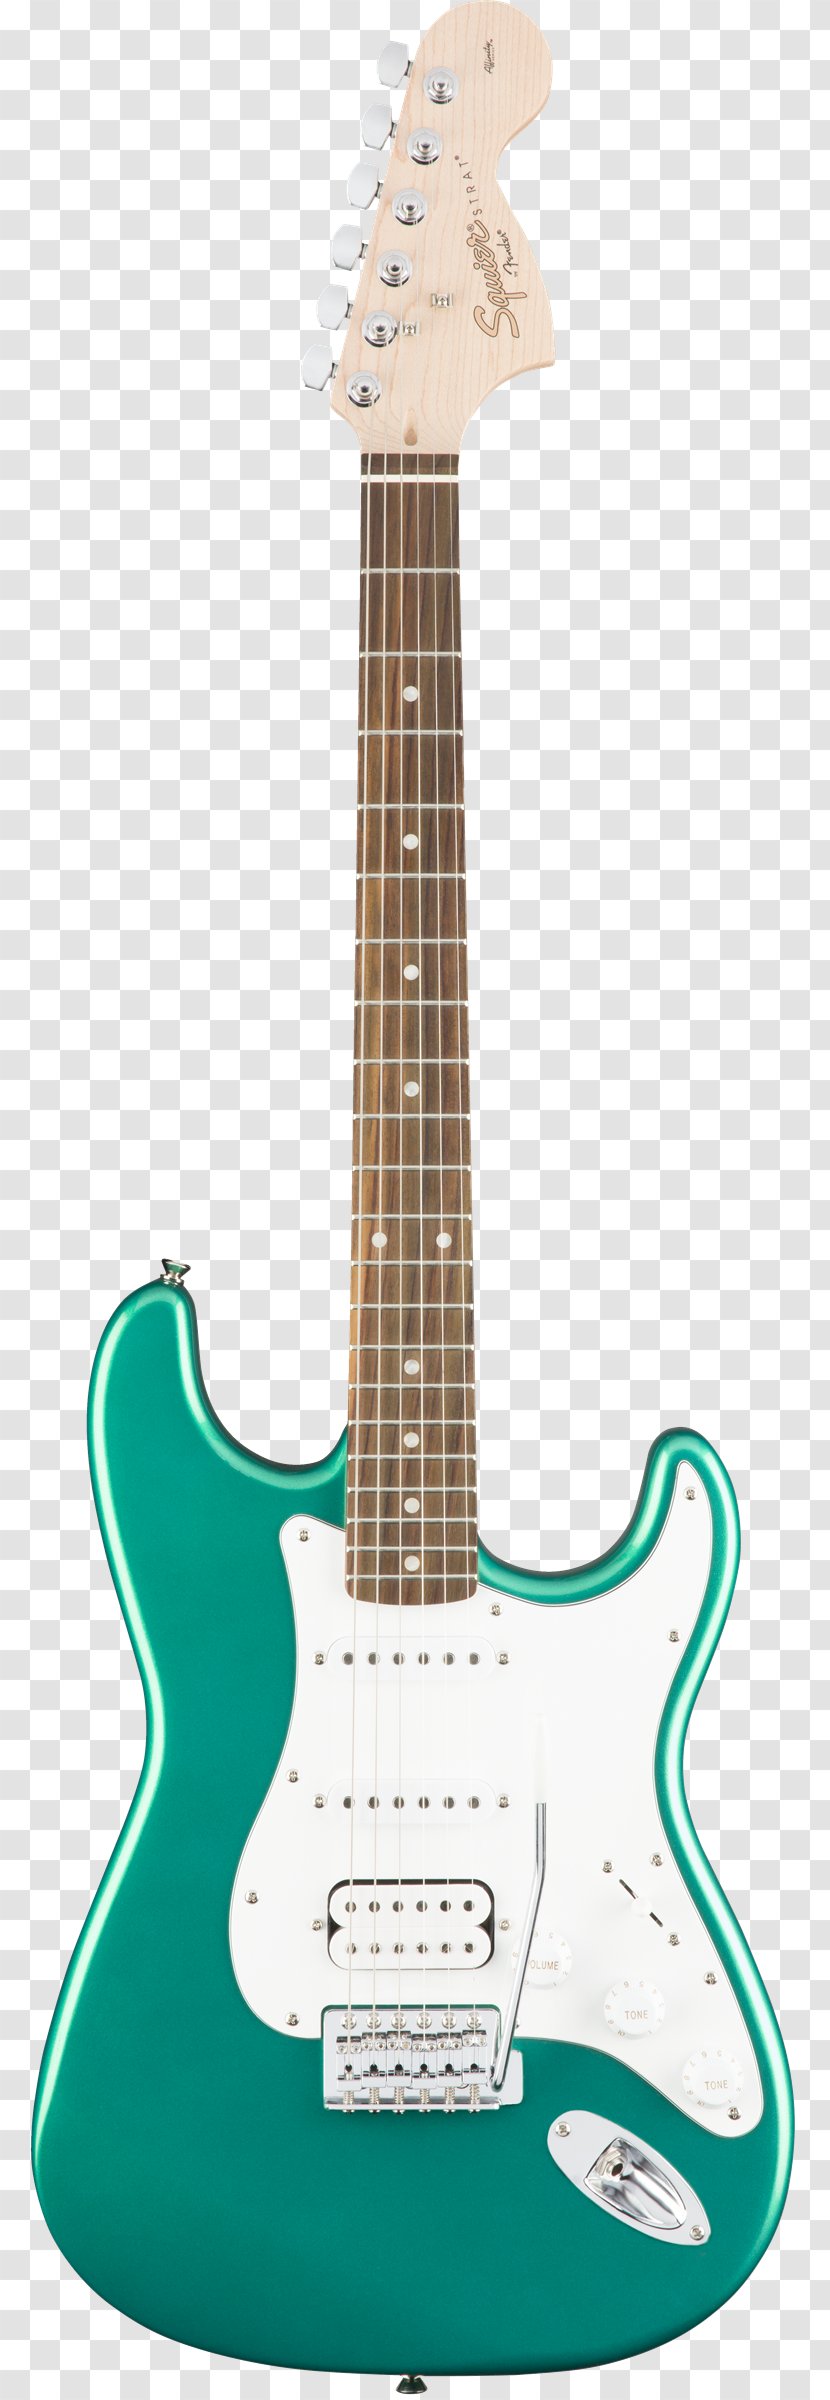 Fender Stratocaster Squier Musical Instruments Corporation Electric Guitar Fingerboard - Tree Transparent PNG